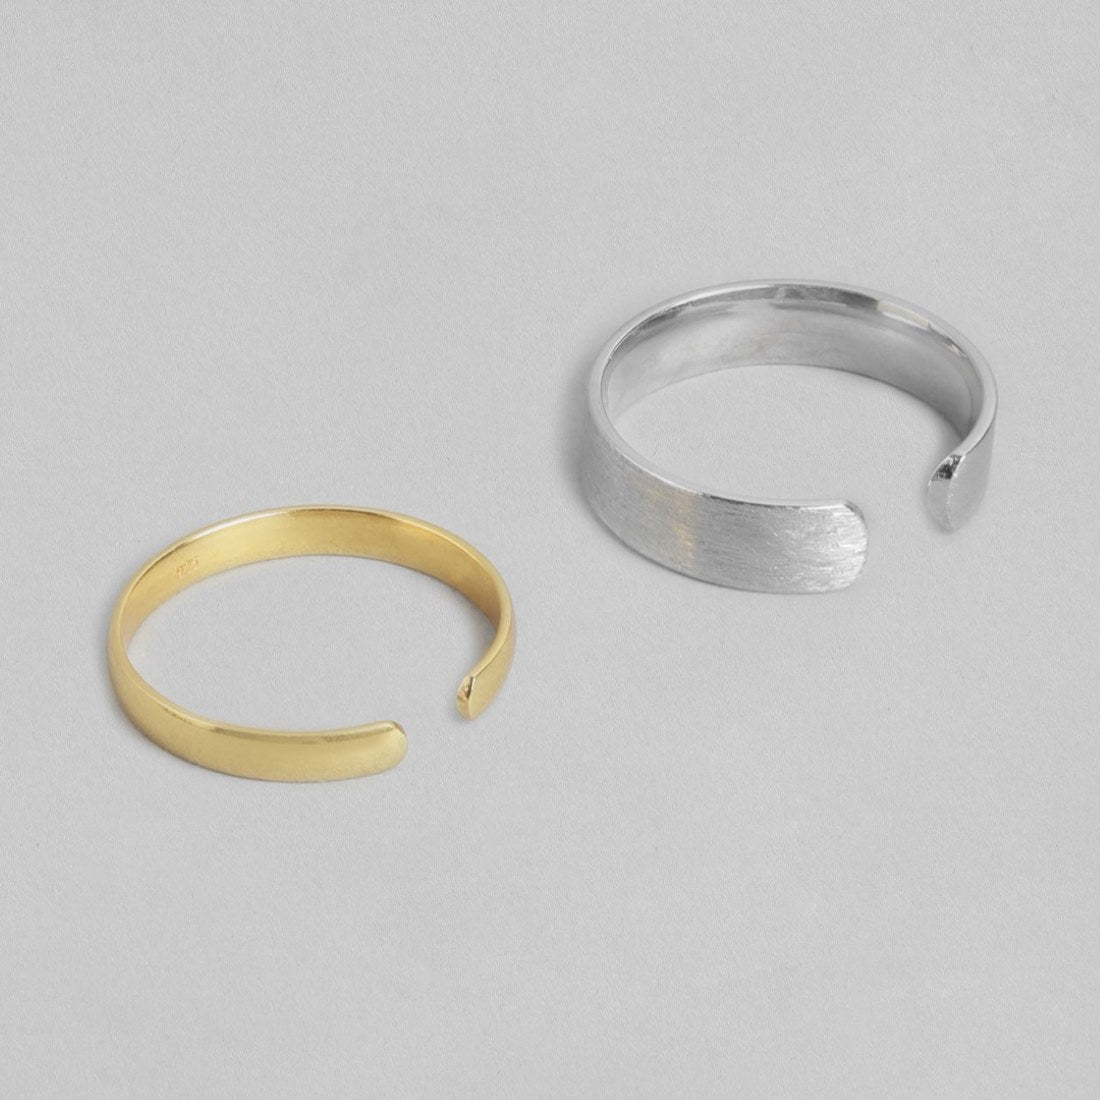 Eternal Unity Rhodium & Gold-Plated 925 Sterling Silver Couple Rings (Adjustable)